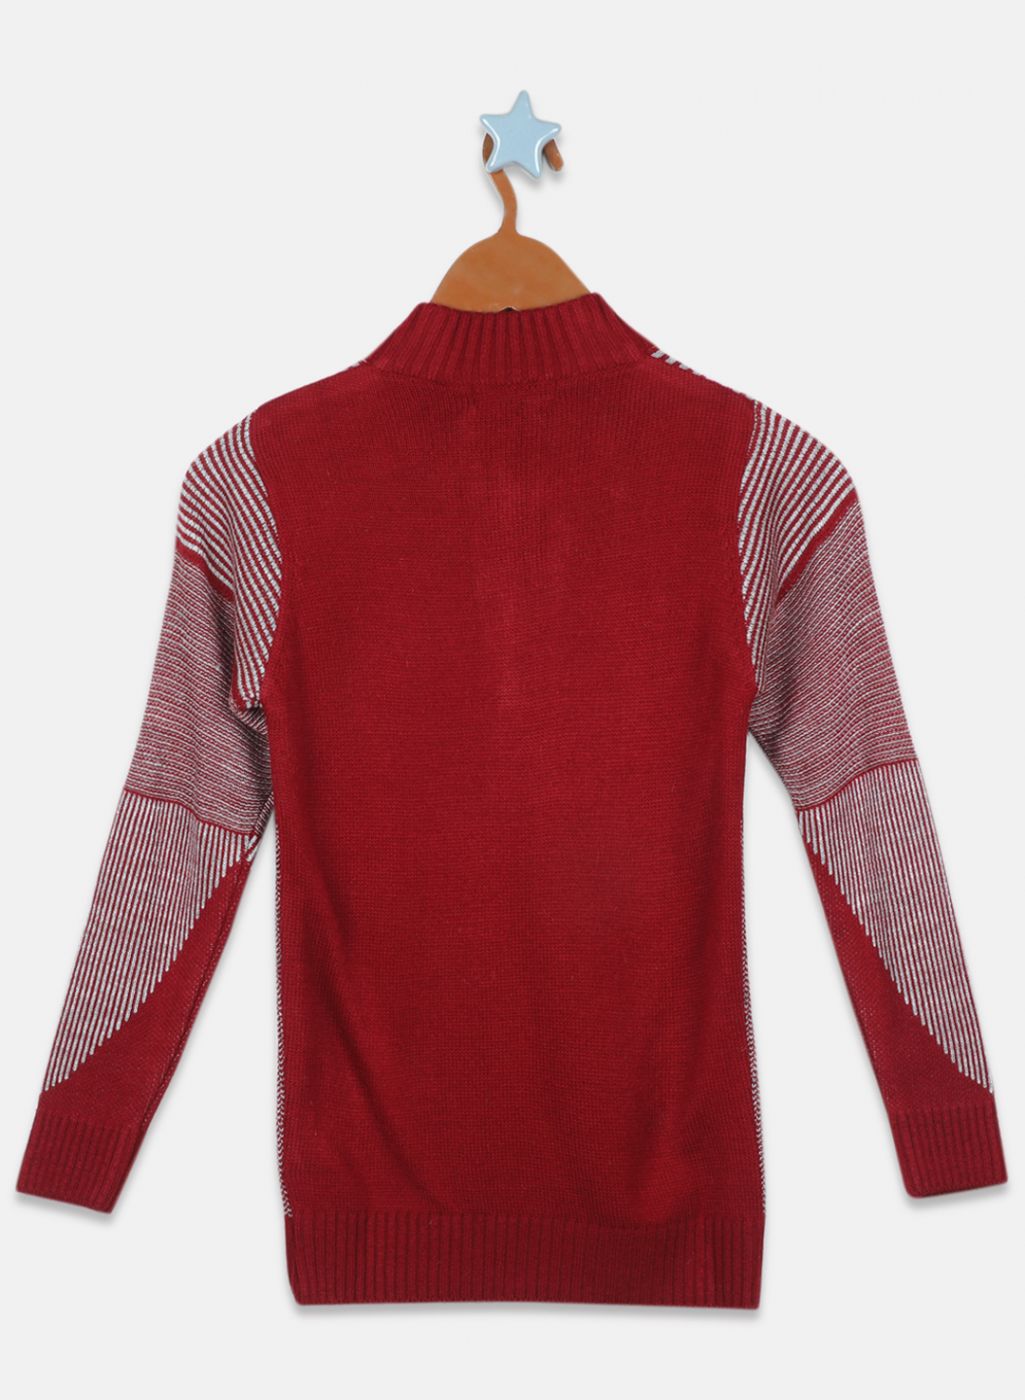 Boys Red Jaquard Pullover